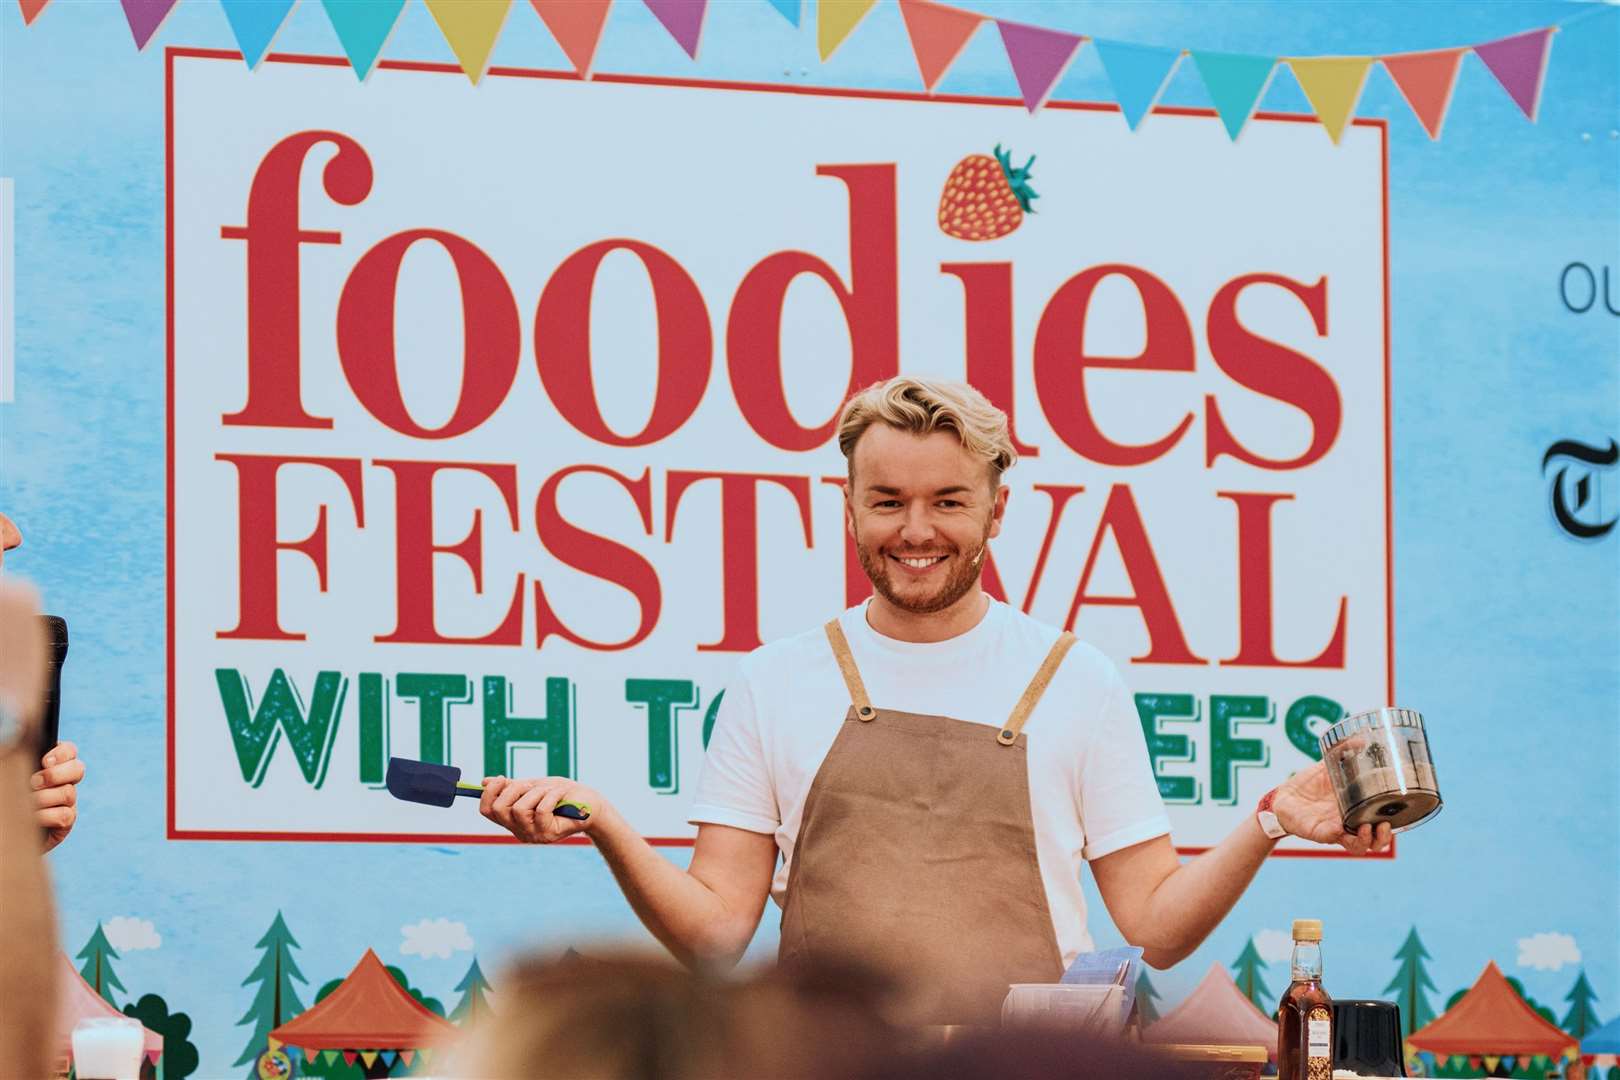 Masterchef winner Tom Rhodes will cook live at this year’s Foodies Festival. Picture: Supplied by Foodies Festival